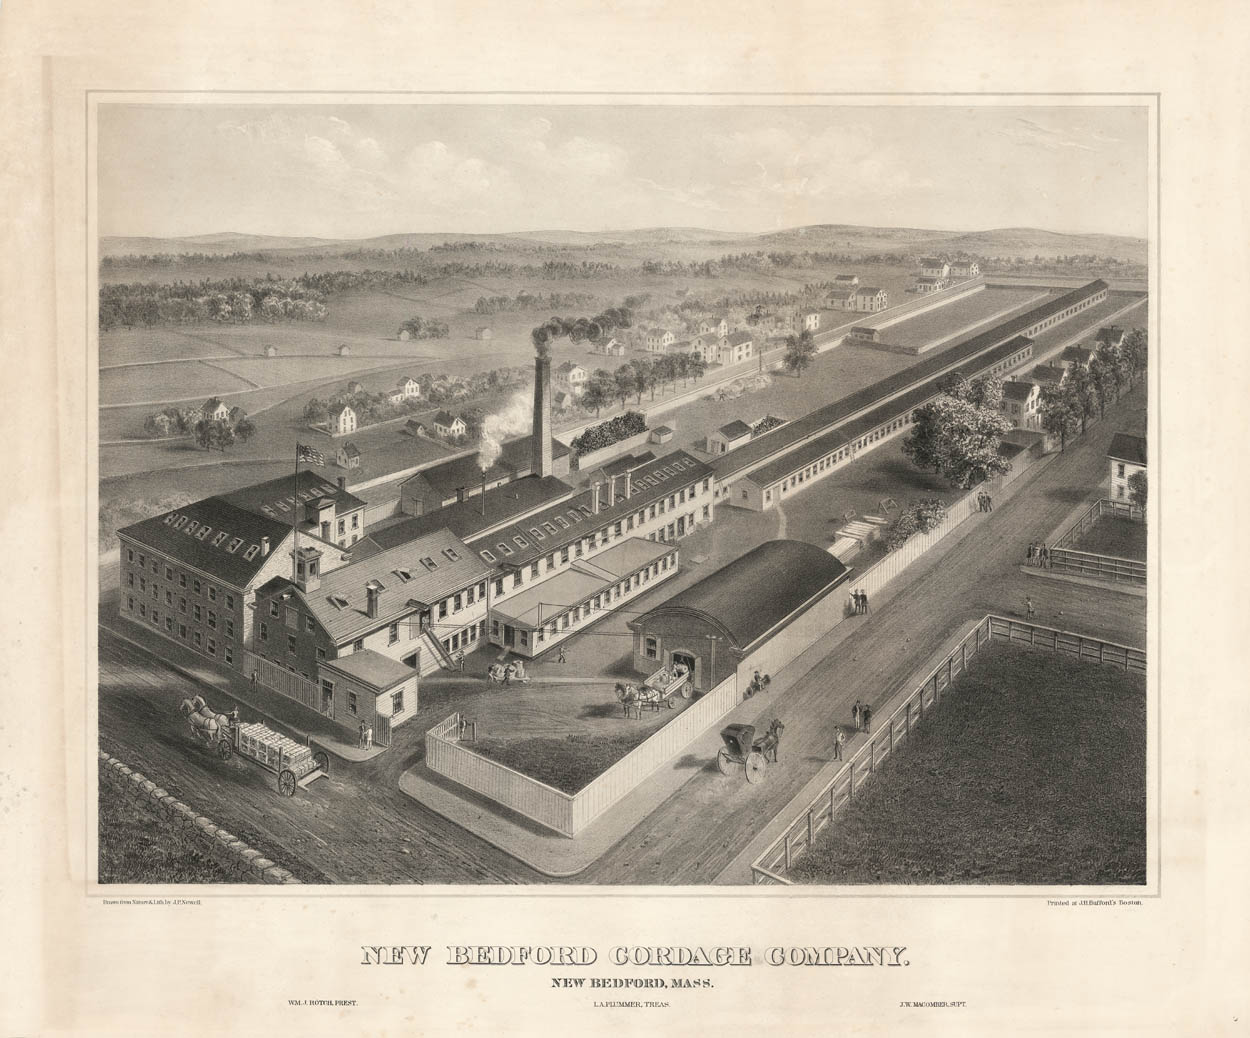 New Bedford Cordage Company. New Bedford, Mass.